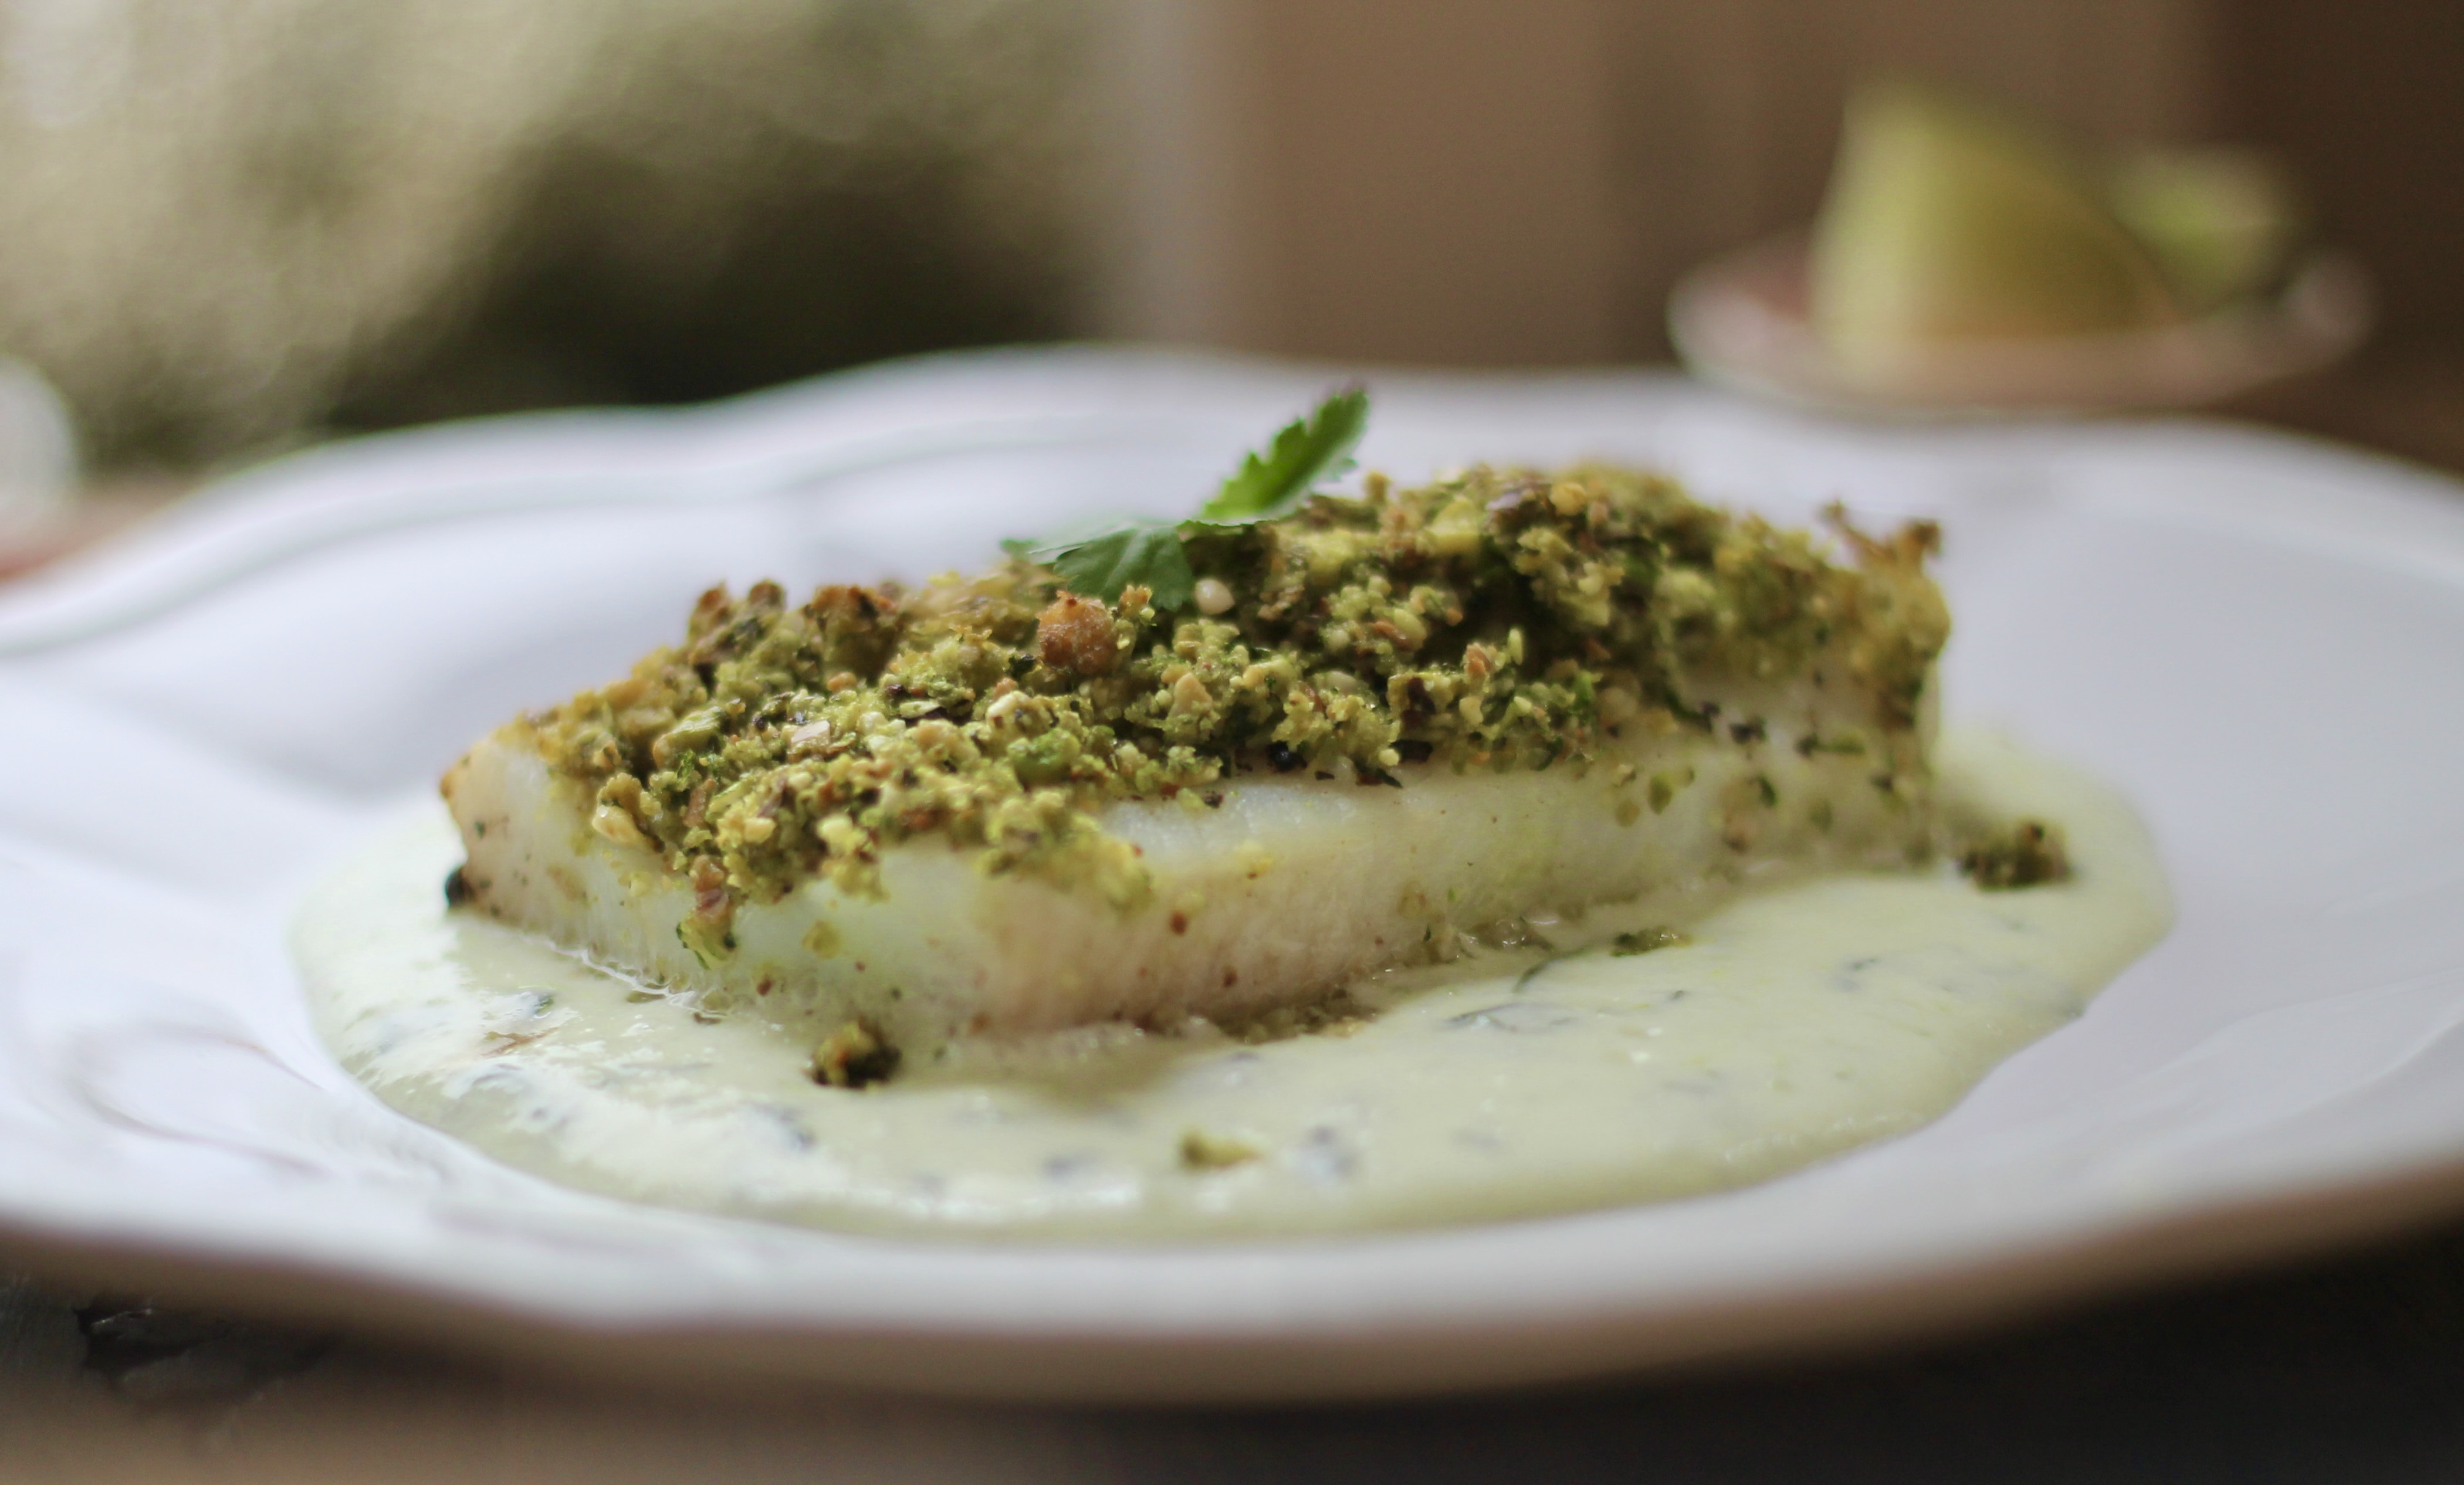 Baked fish fillets with coconut cilantro sauce